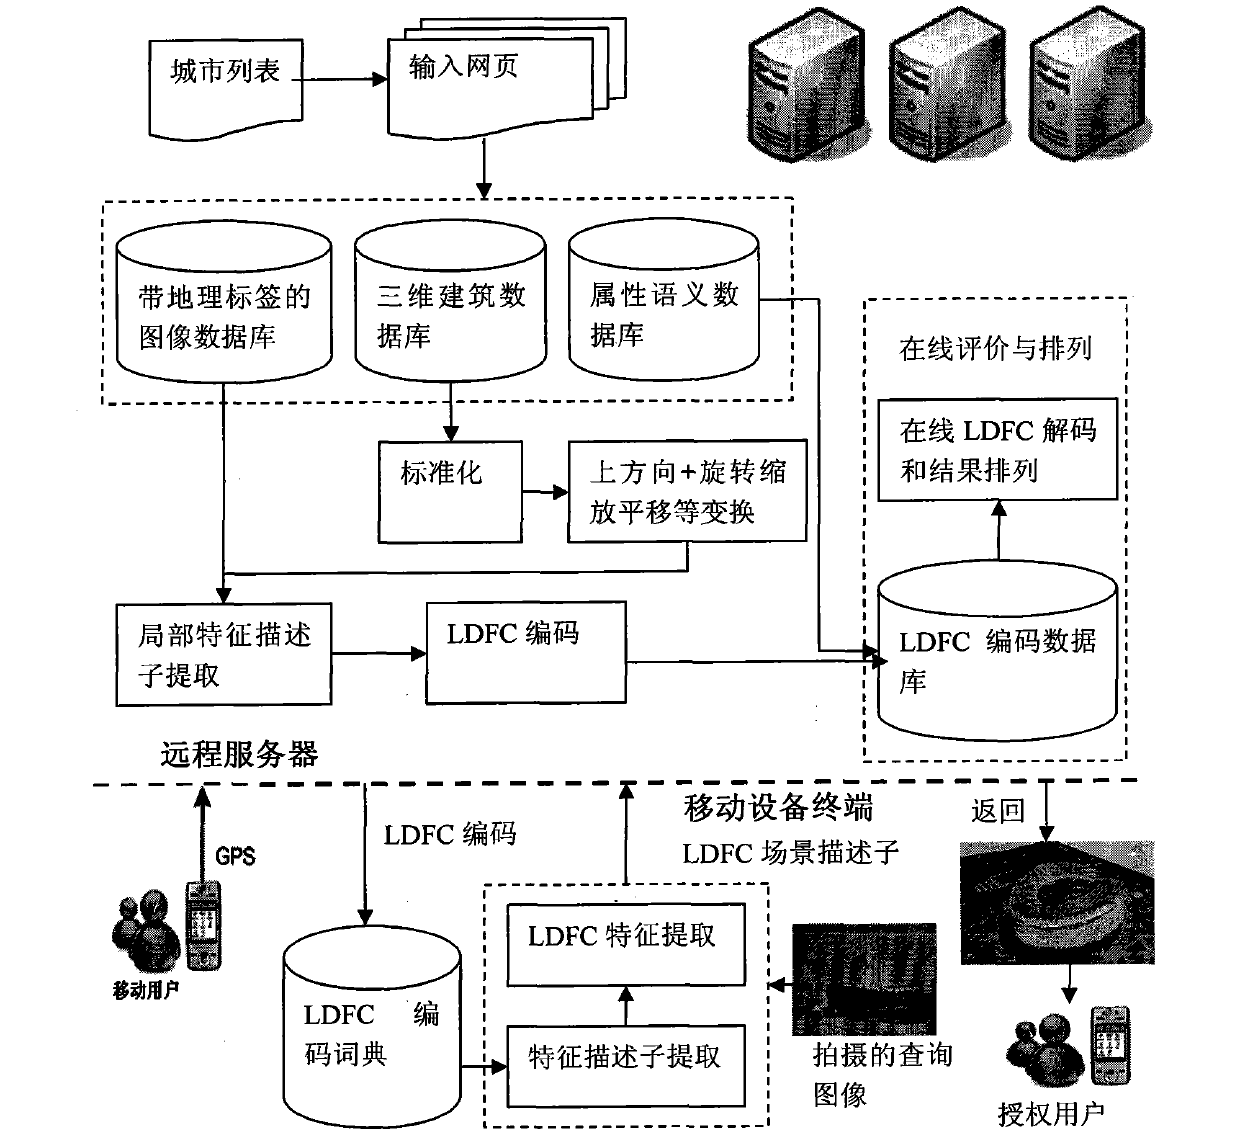 Real-time searching and combining technology of mobile end three-dimensional city model based on Internet